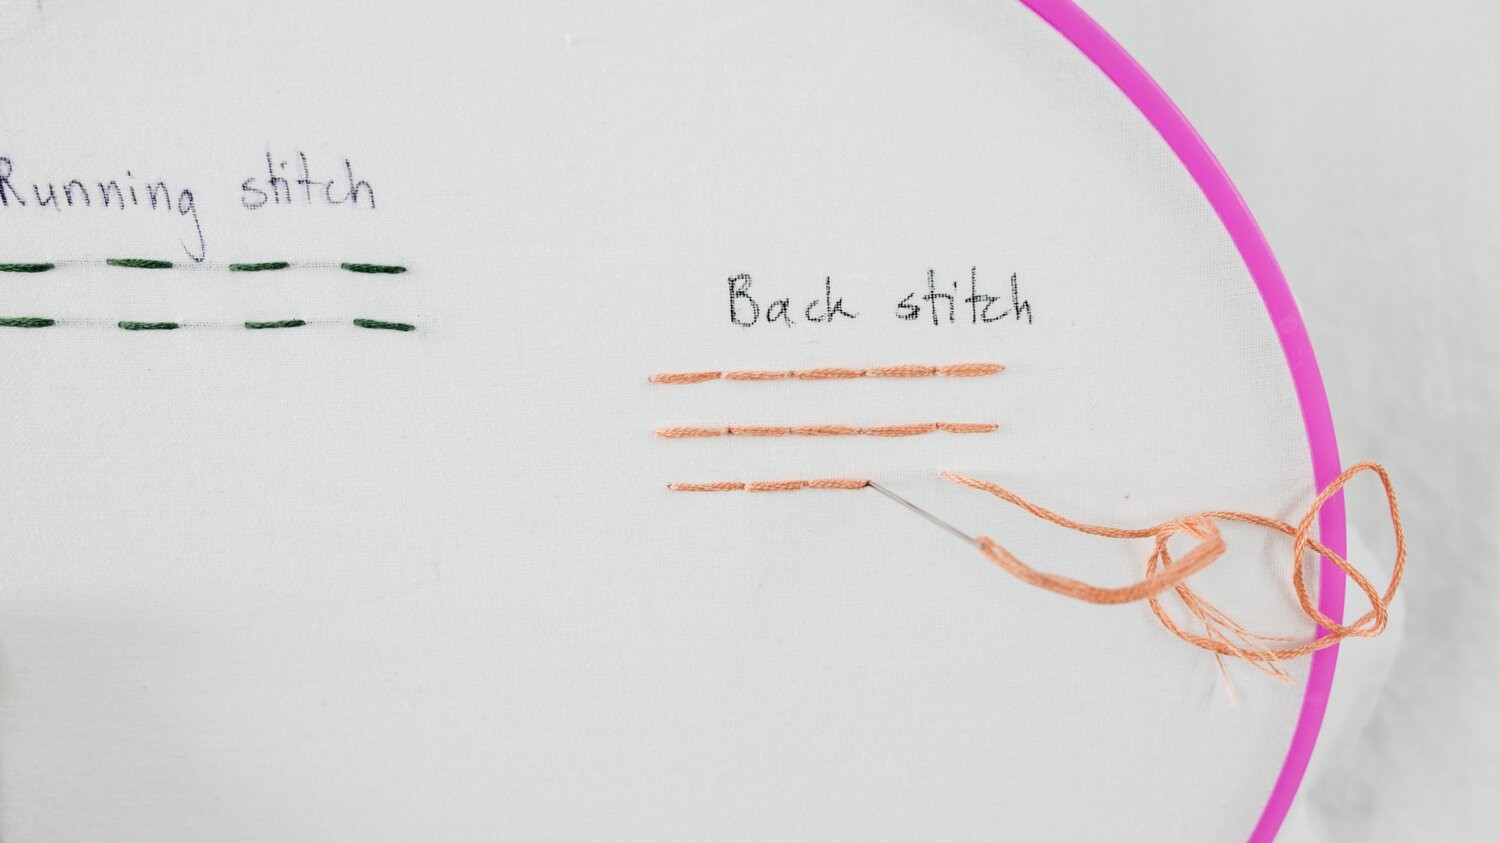 This image shos is Step. 5 of back stitch, repeating this method until you have a solid line of stitches.